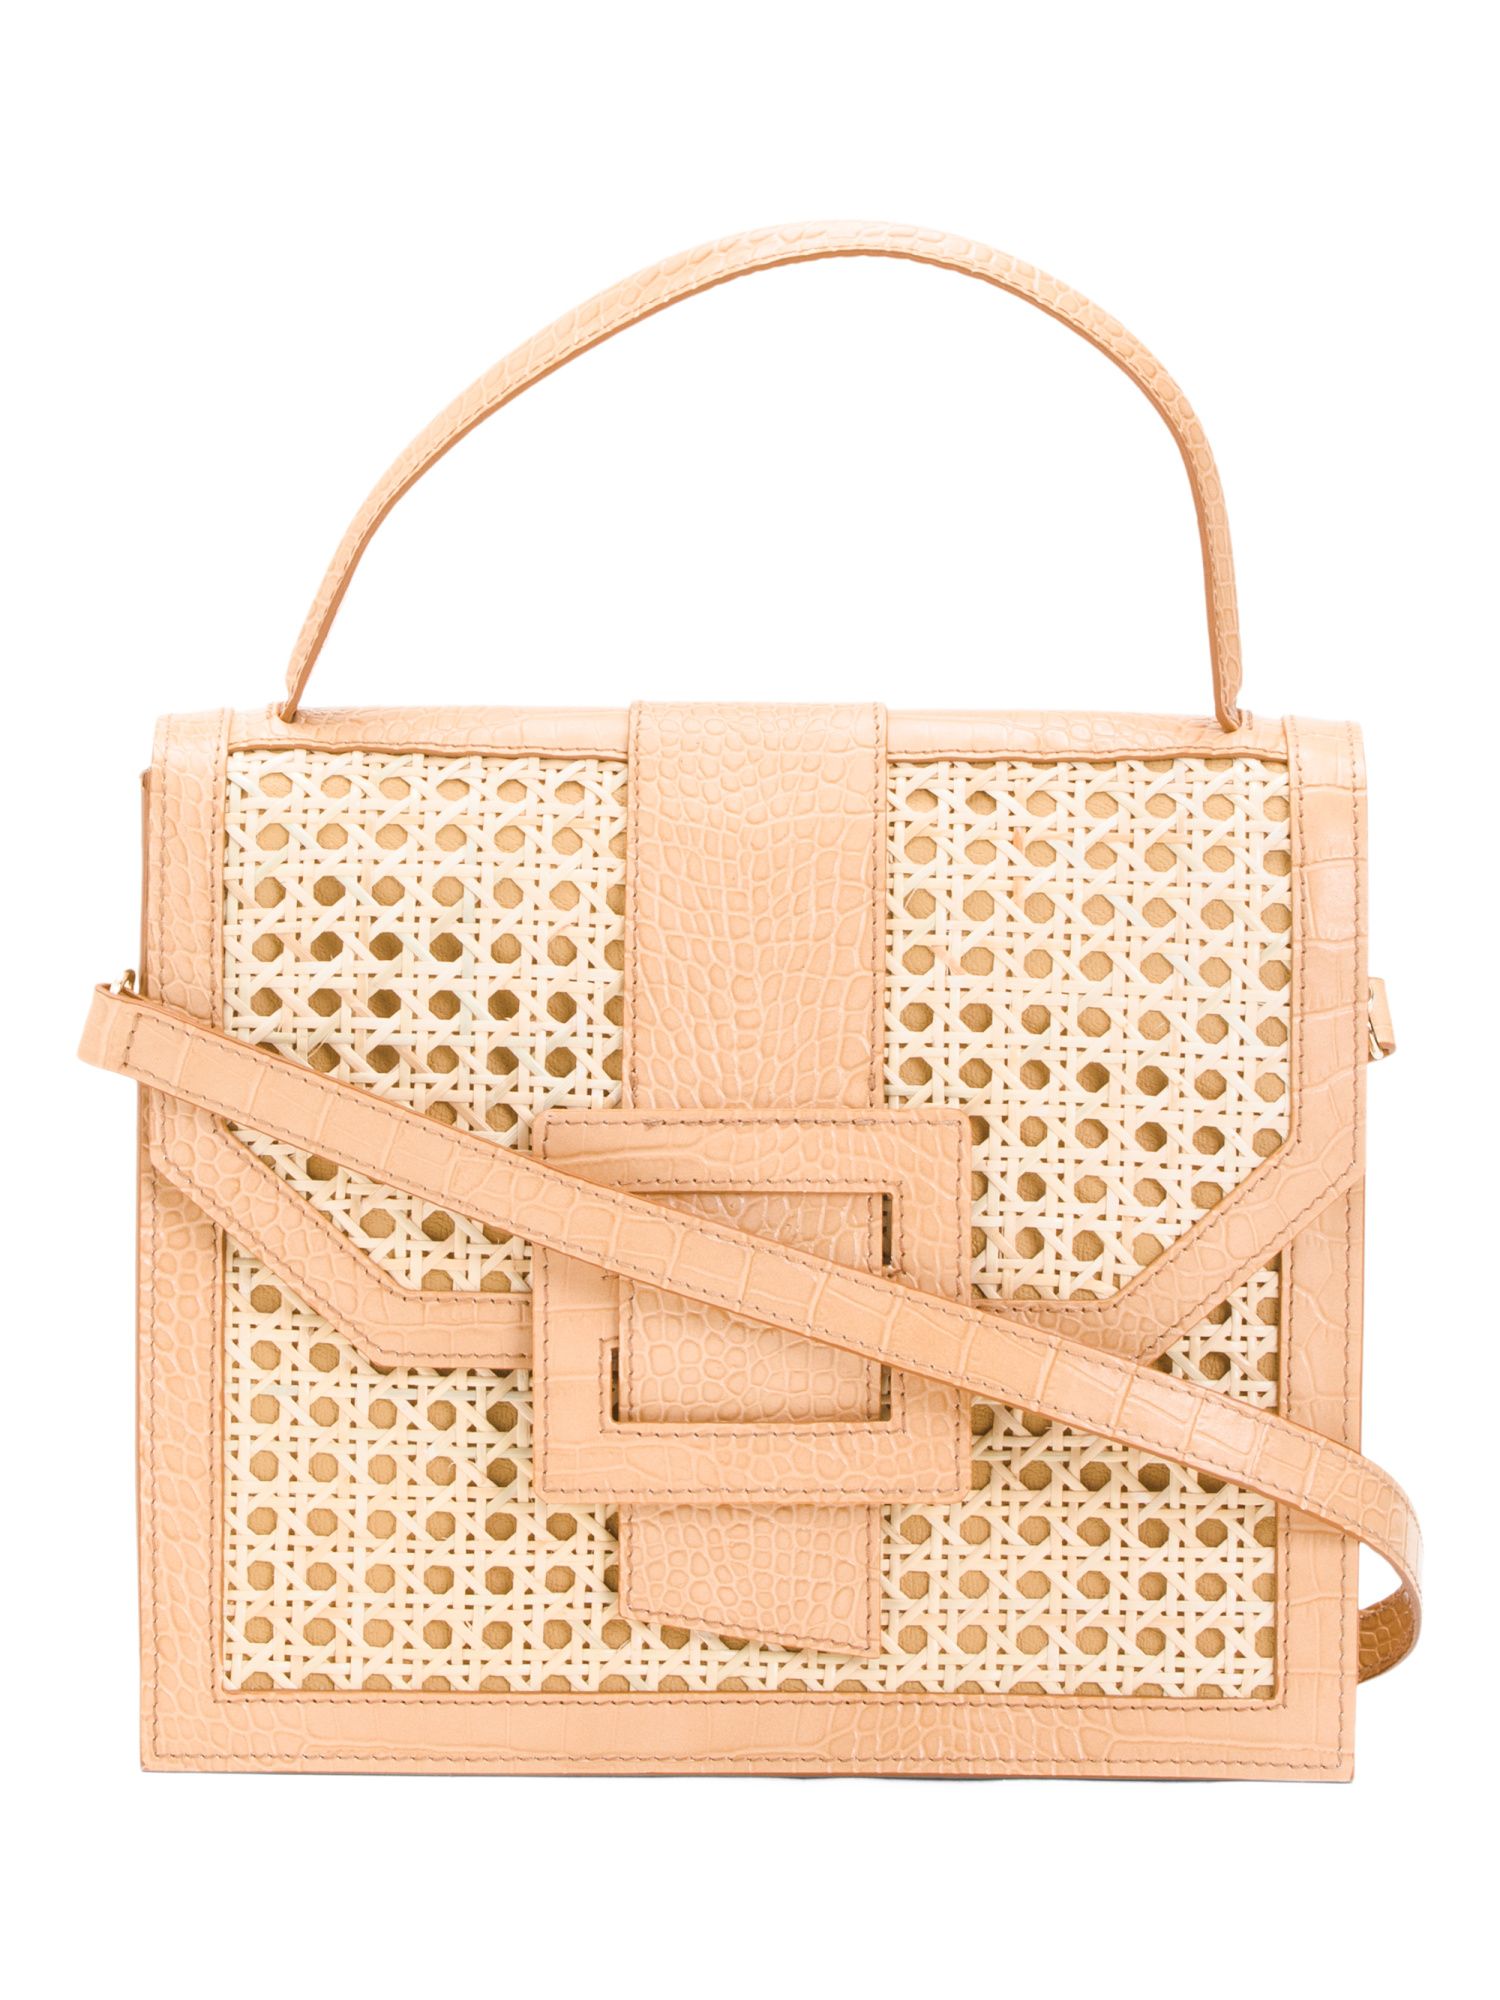 Made In Italy Leather Croc Embossed Buckle Satchel | TJ Maxx